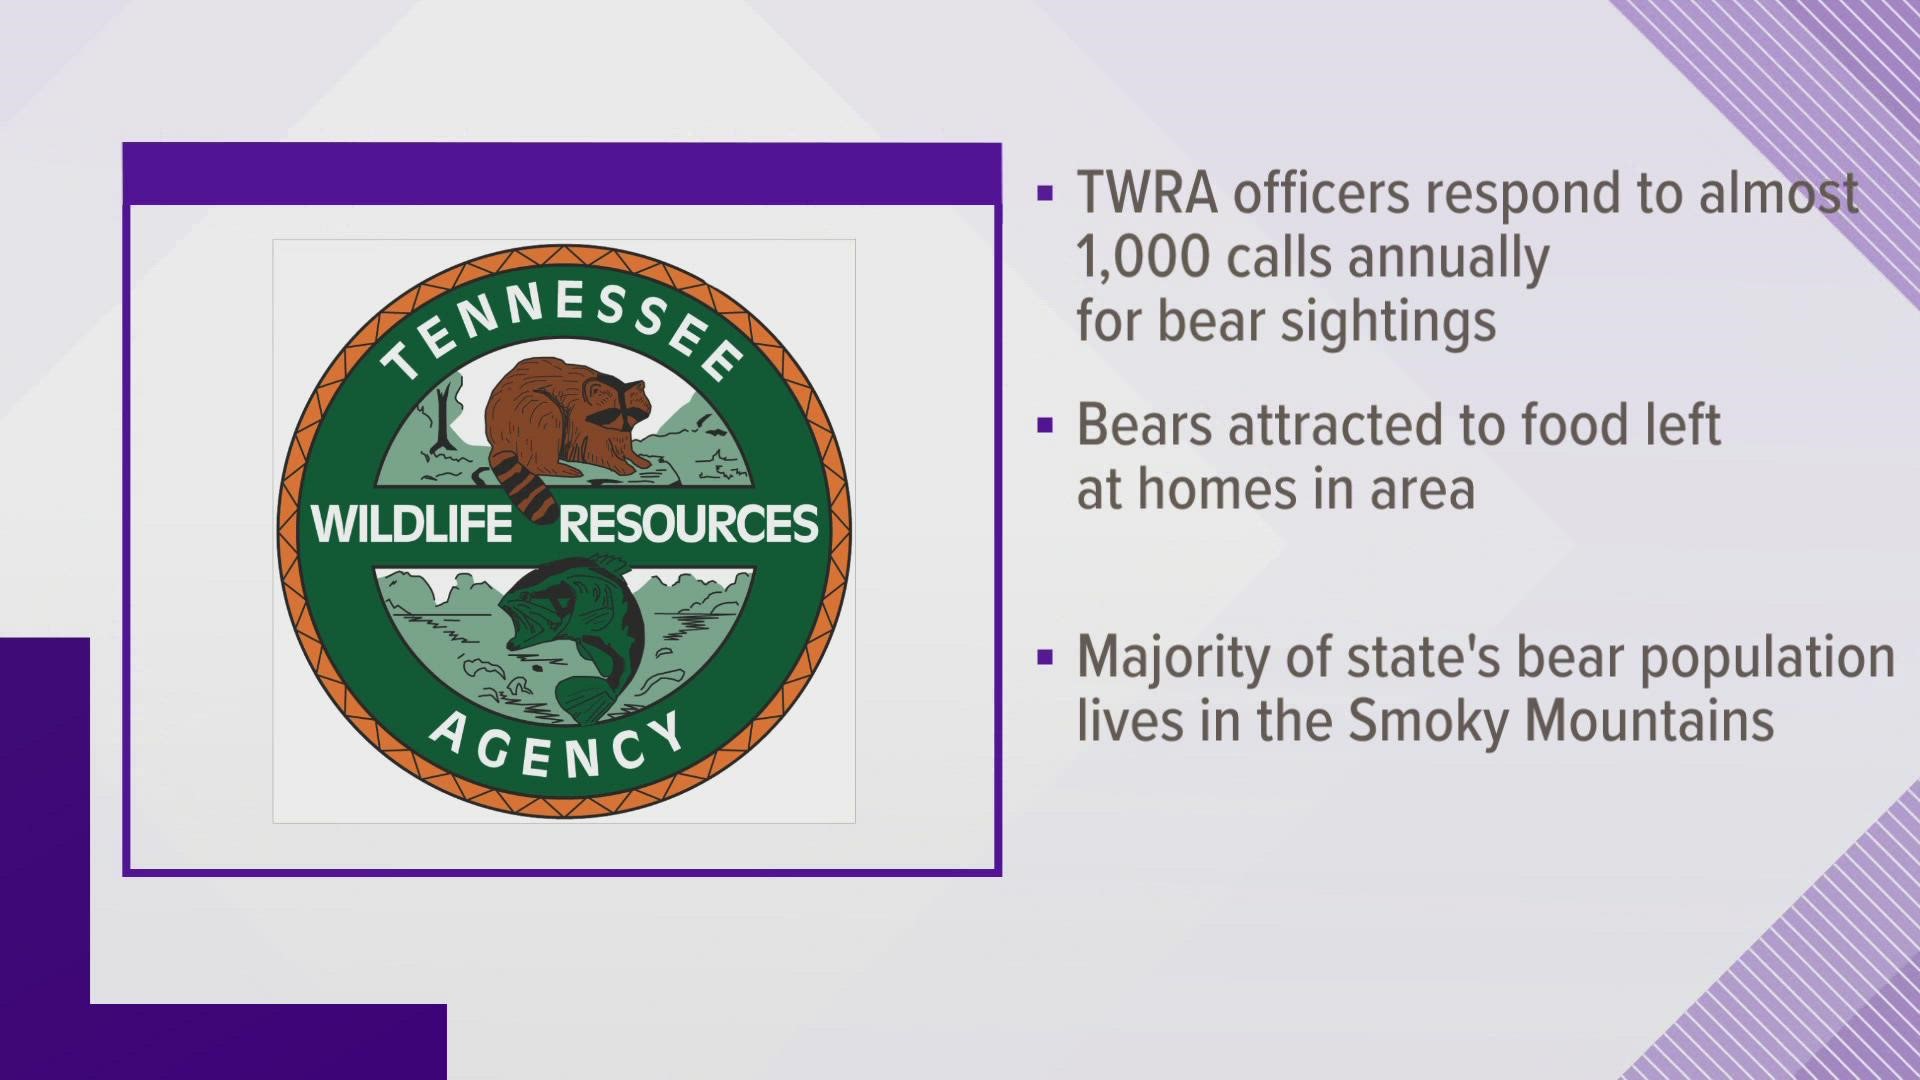 TWRA wildlife officers in the region respond to 500-1,000 annual calls in regard to black bears, many of which are nuisance calls in Sevier County.